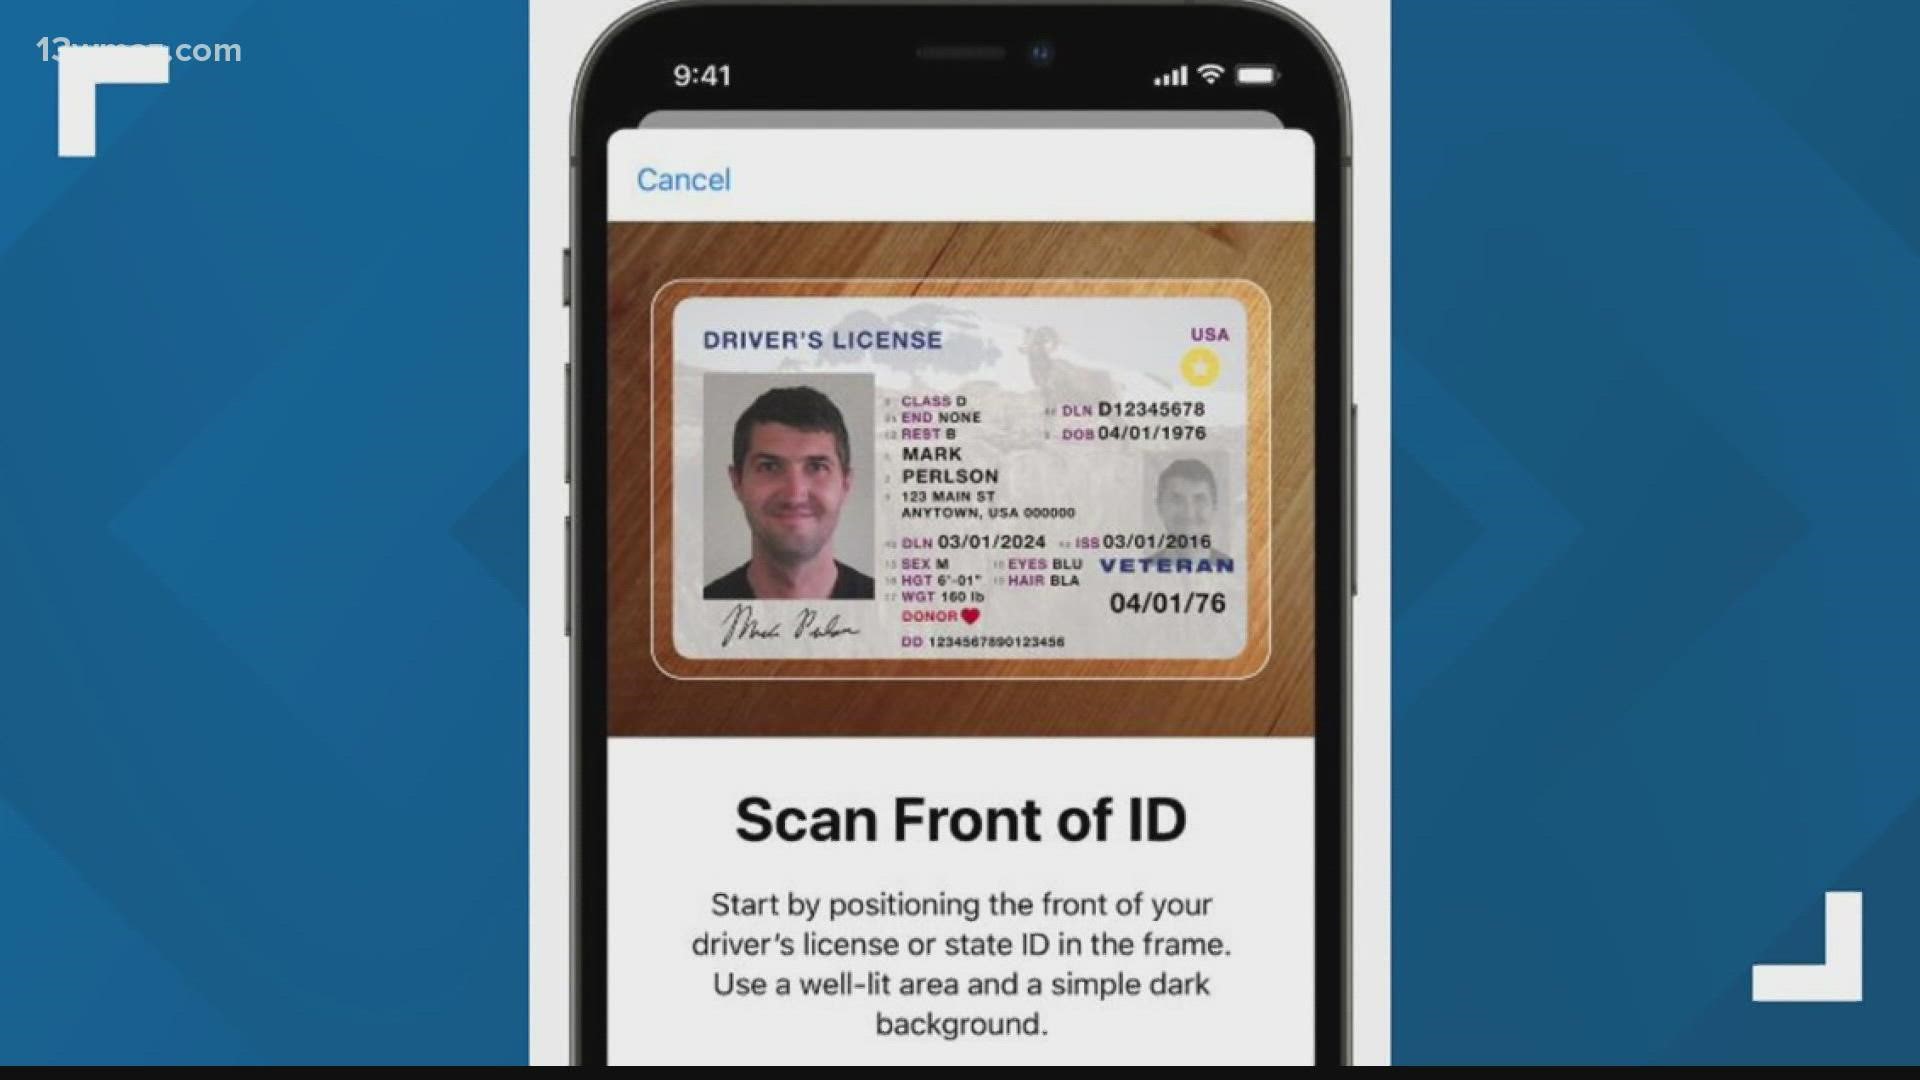 Within the next year, if you use an iPhone, you'll be able to store your license and ID card digitally.